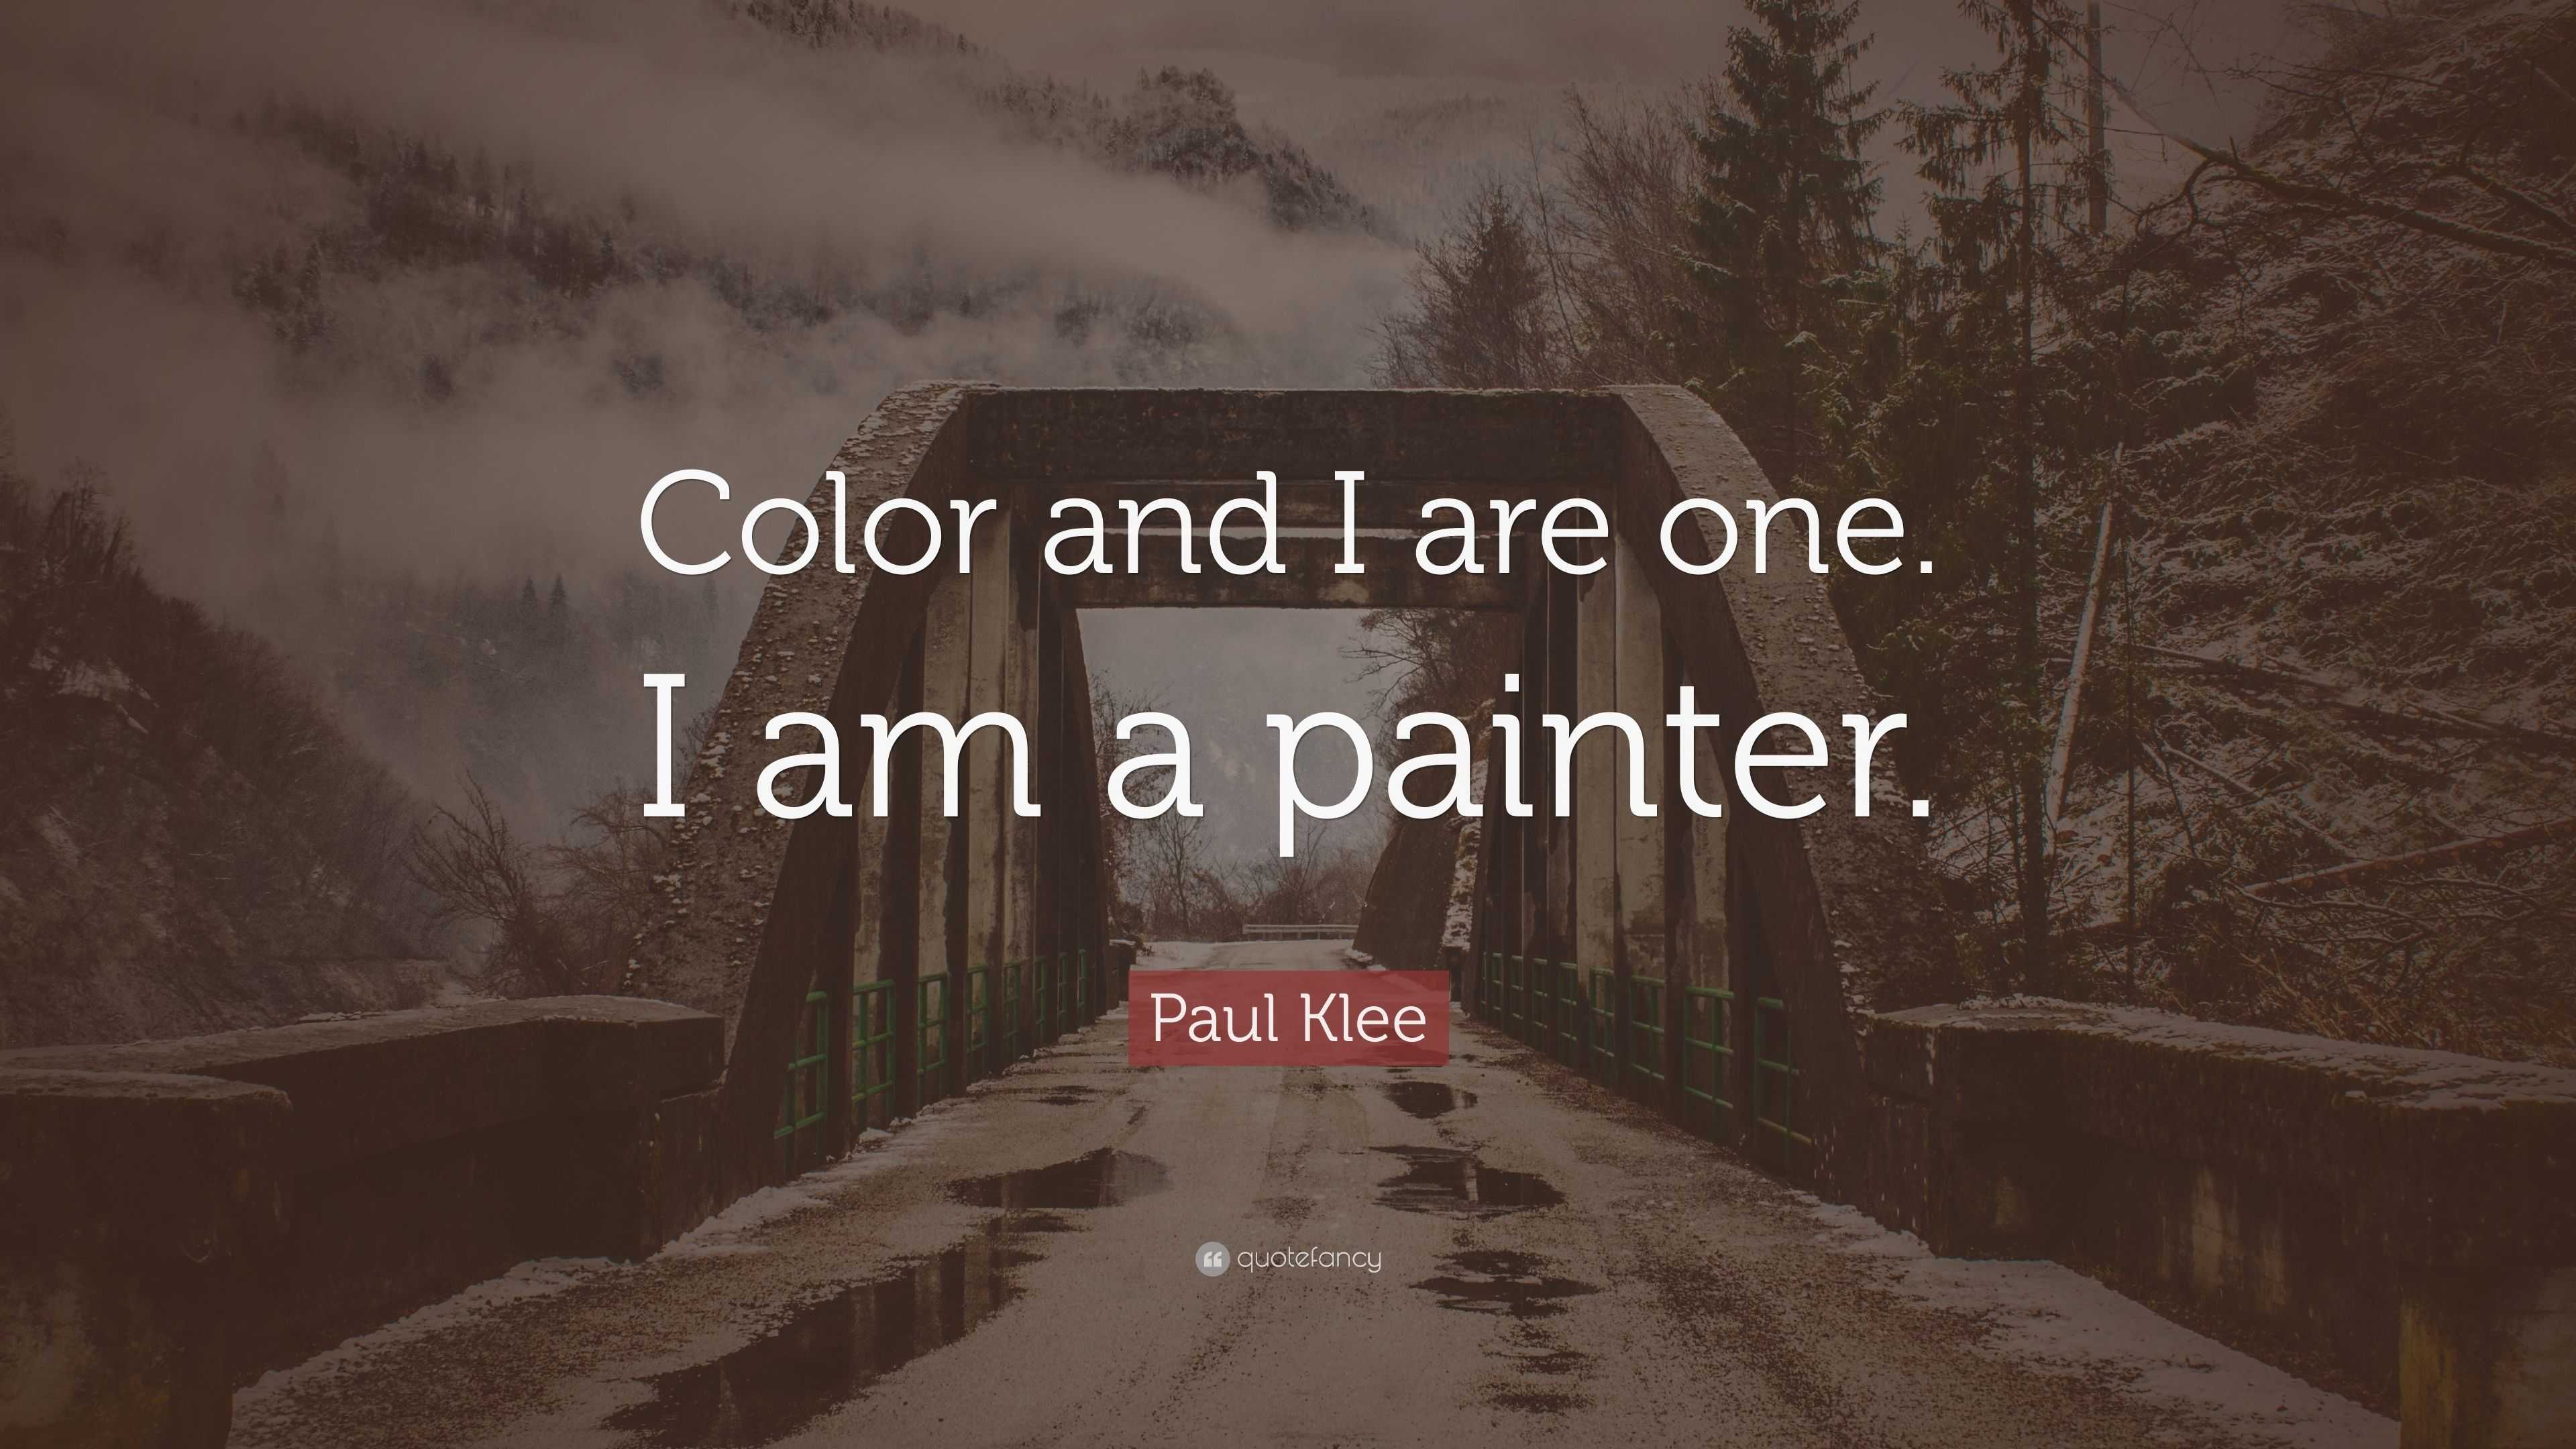 Paul Klee Quote: “Color and I are one. I am a painter.”